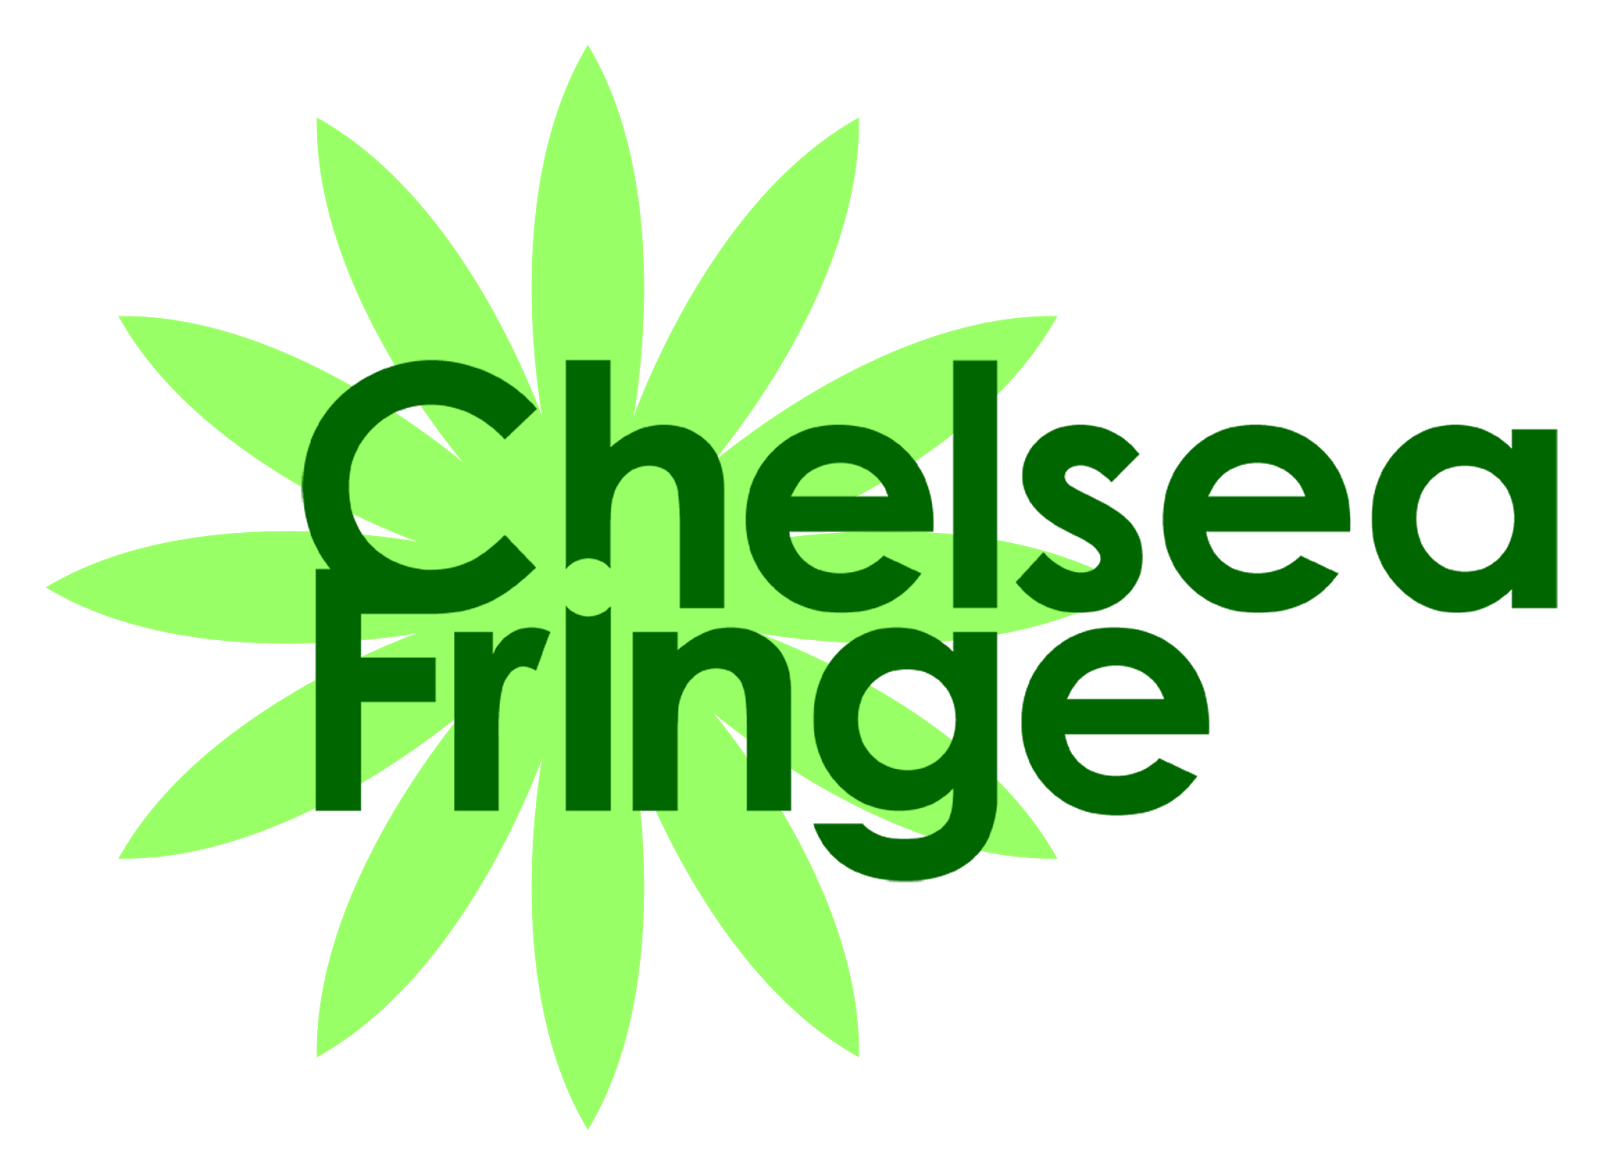 logo chelsea, may chelsea fringe living under one sun community charity and volunteering